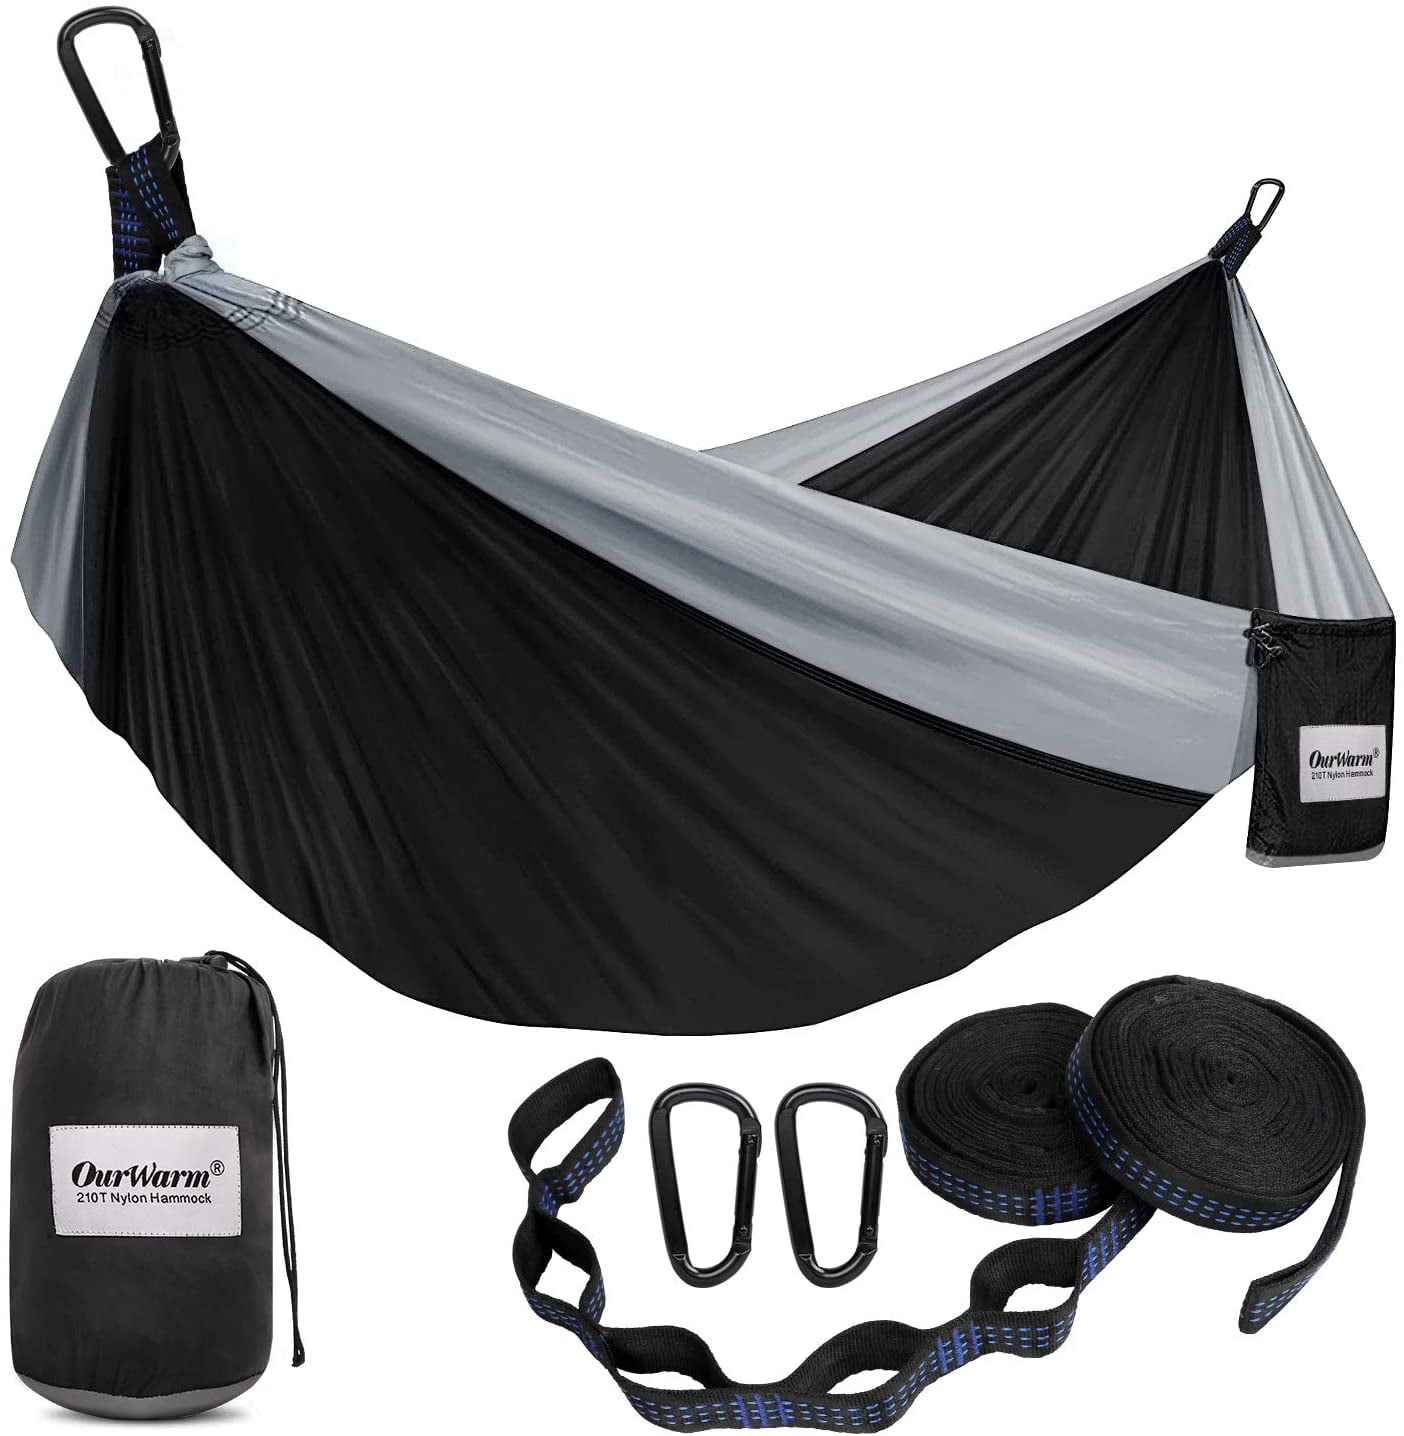 10+2 Loops Backyard Beach Portable Hammock with Tree Straps Outdoor Lightweight Parachute Hammocks for Backpack Camping Hammock Single Travel Hammock with 210T Nylon Hiking for Kids and Adult 